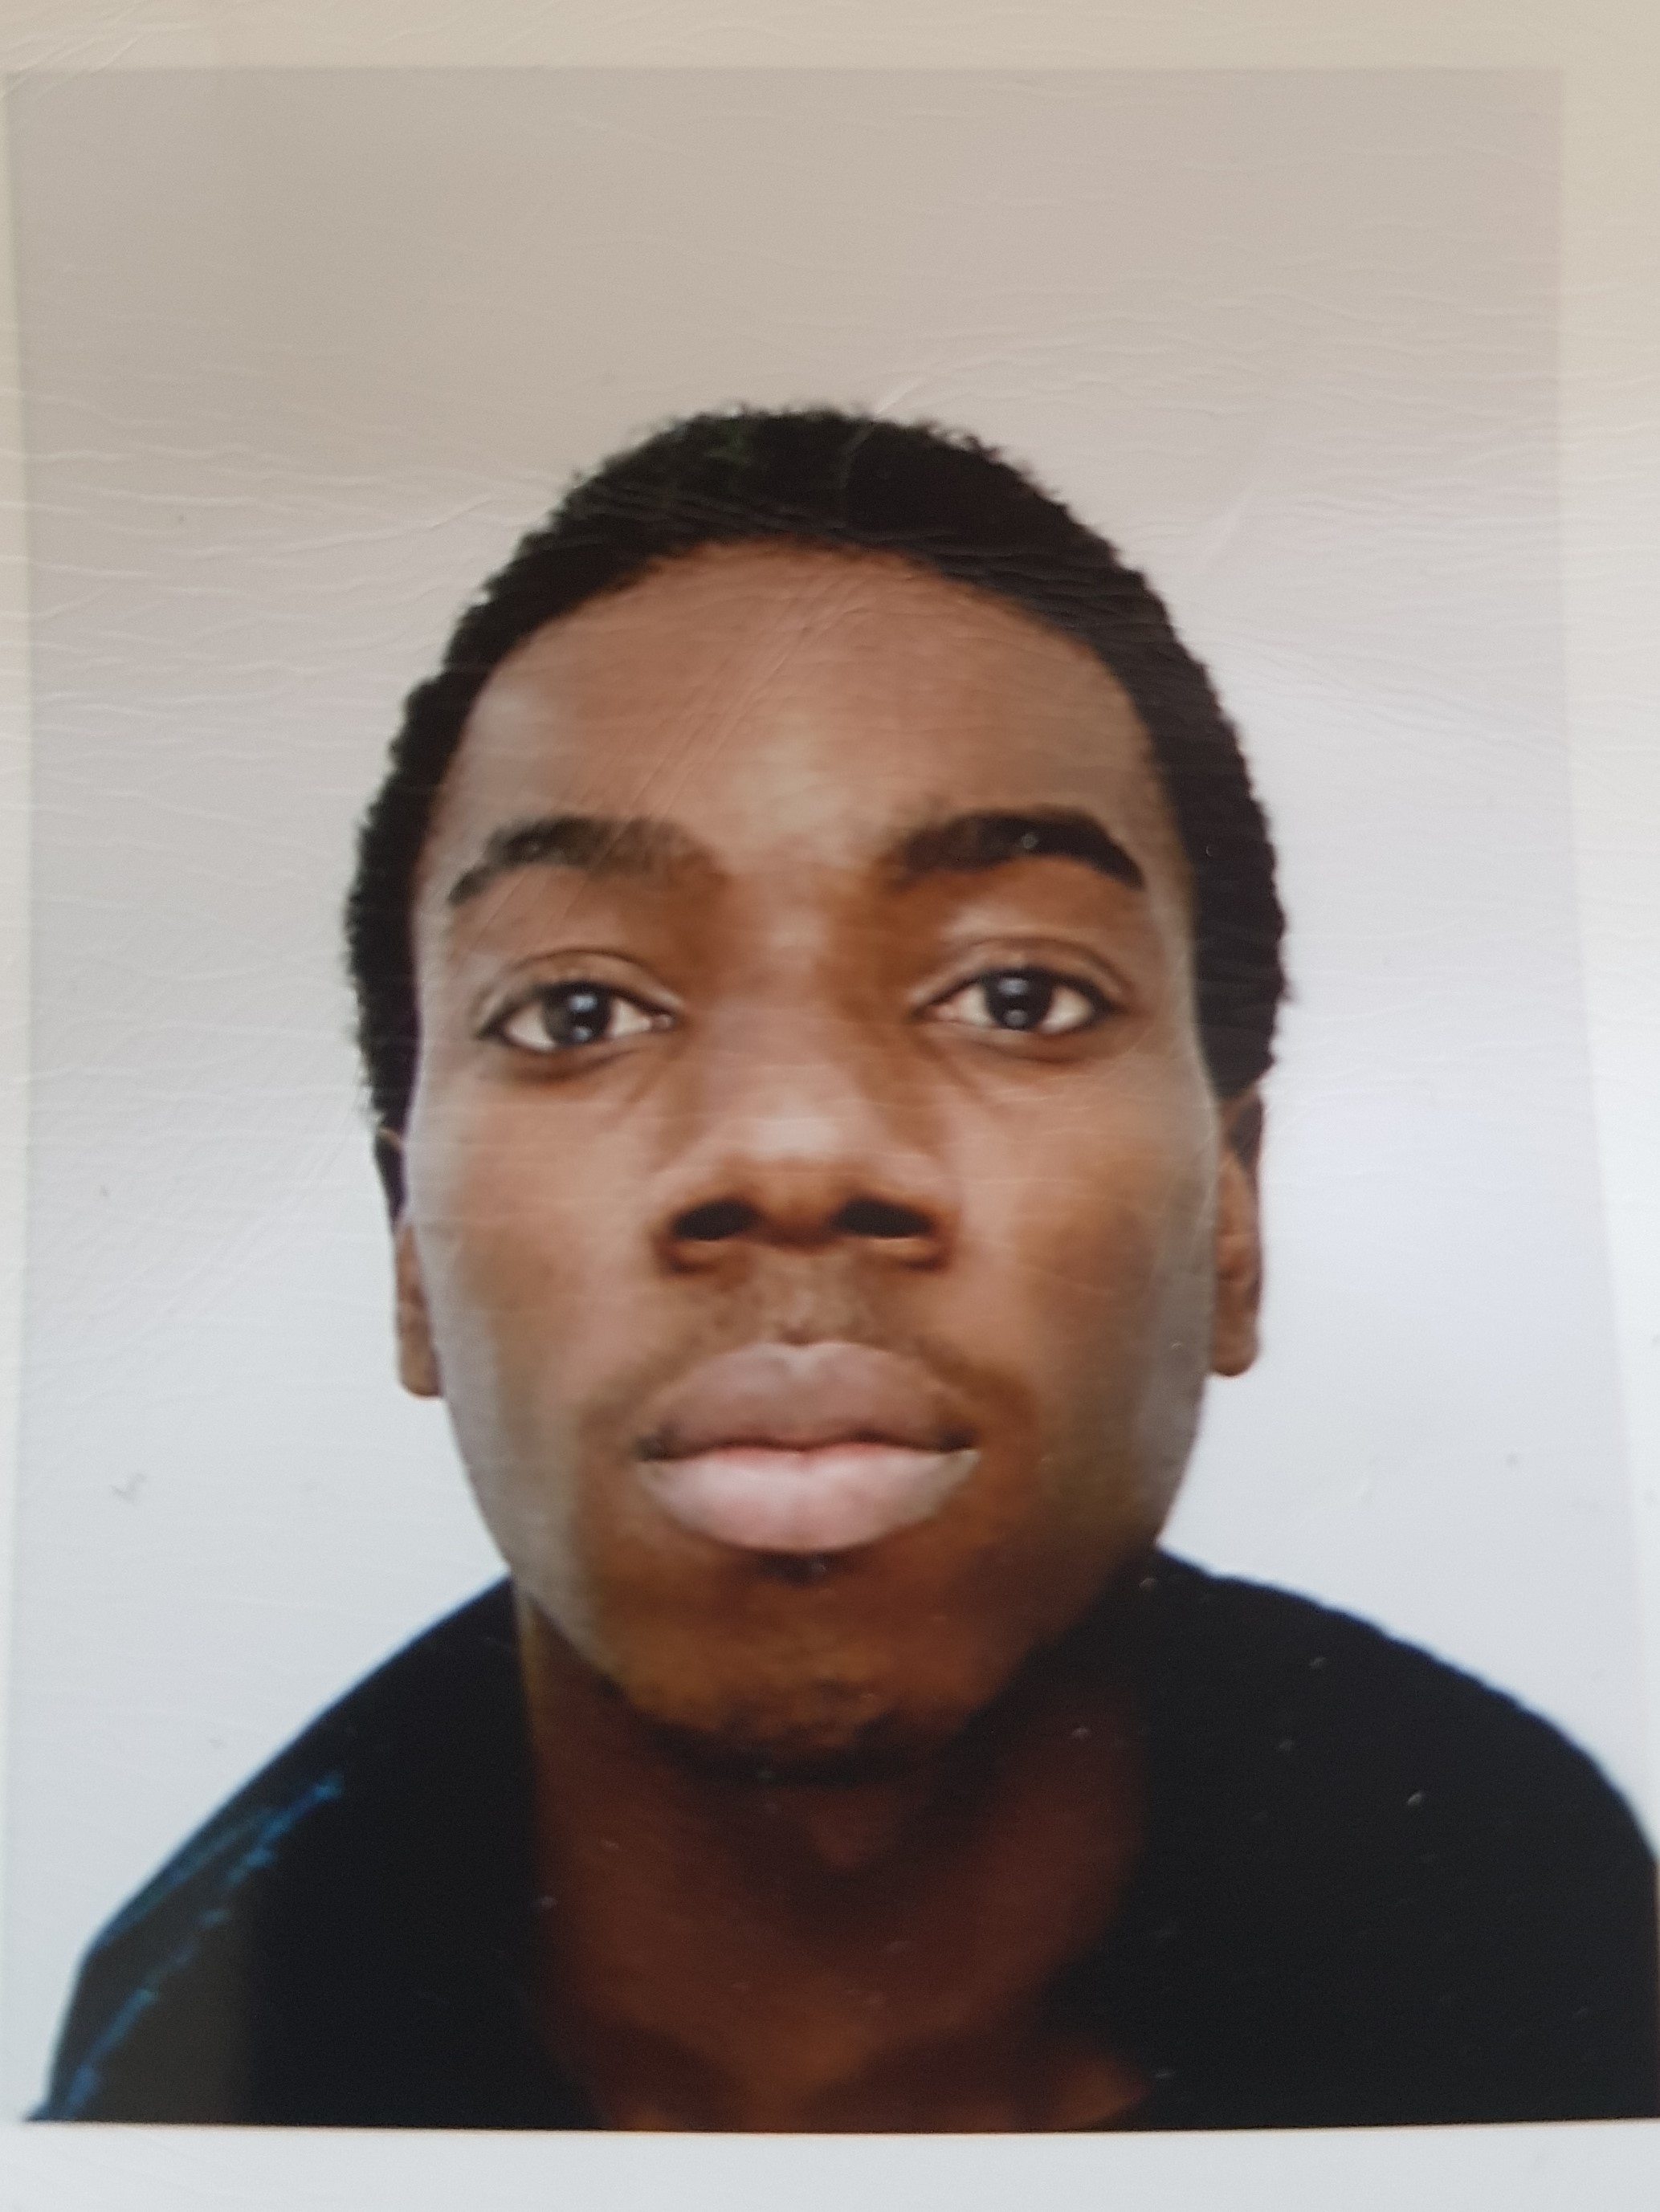 Undated handout photo issued by the Metropolitan Police of missing student Richard Okorogheye. Mr Okorogheye is believed to have left his family home in the Ladbroke Grove area of west London on the evening of March 22 and was reported missing two days